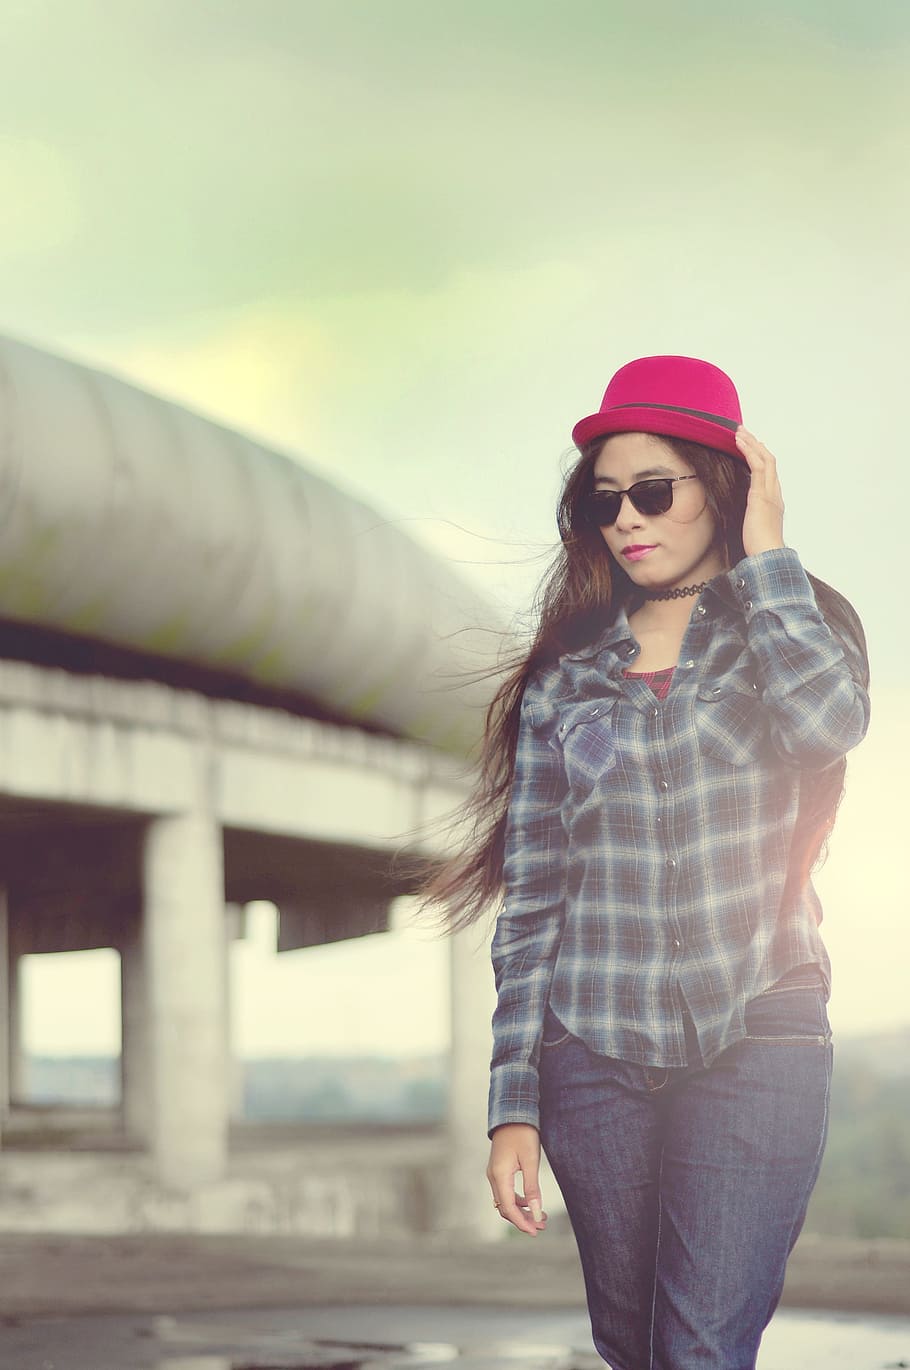 women, cheerful, model, indonesian women, red hat, afternoon, out door, girl, fashion, sunglasses